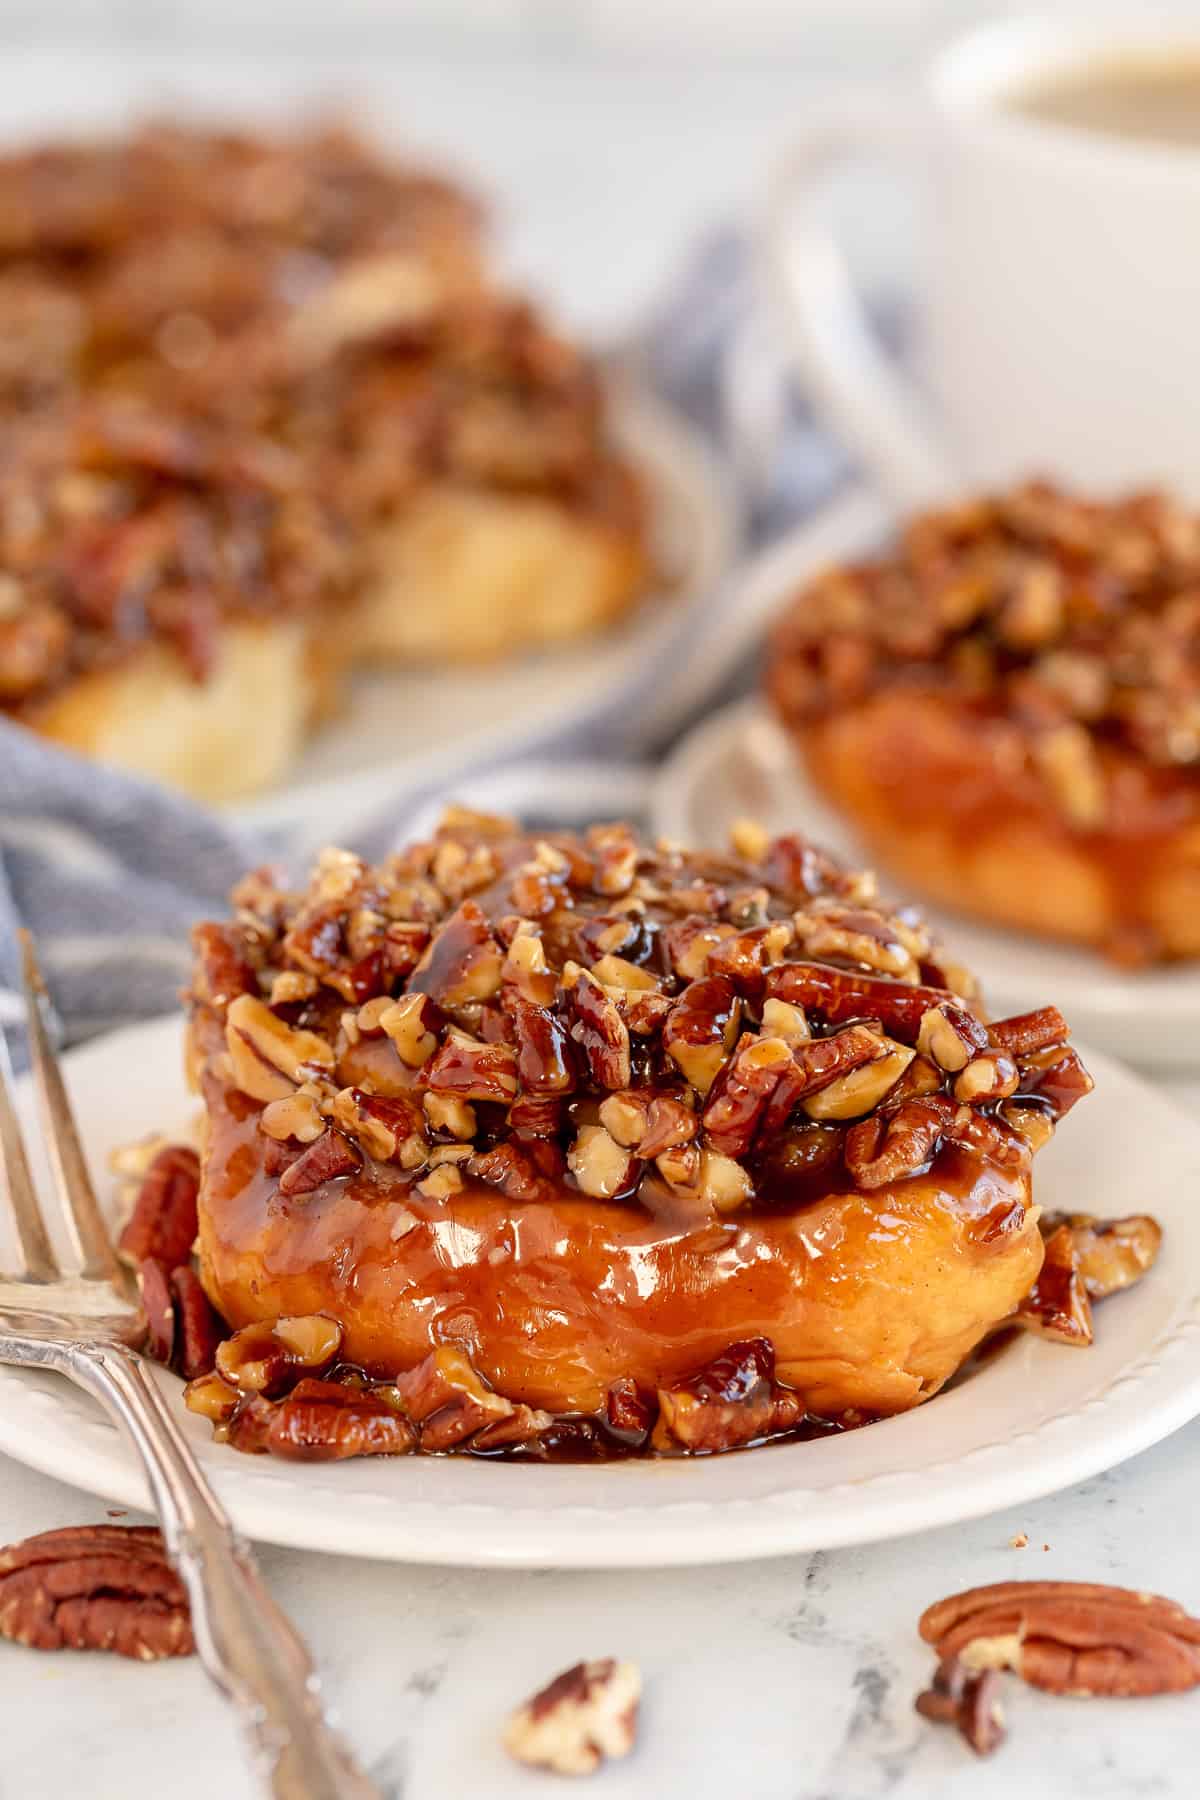 A Pecan Sticky Bun on a white plate with a fork.